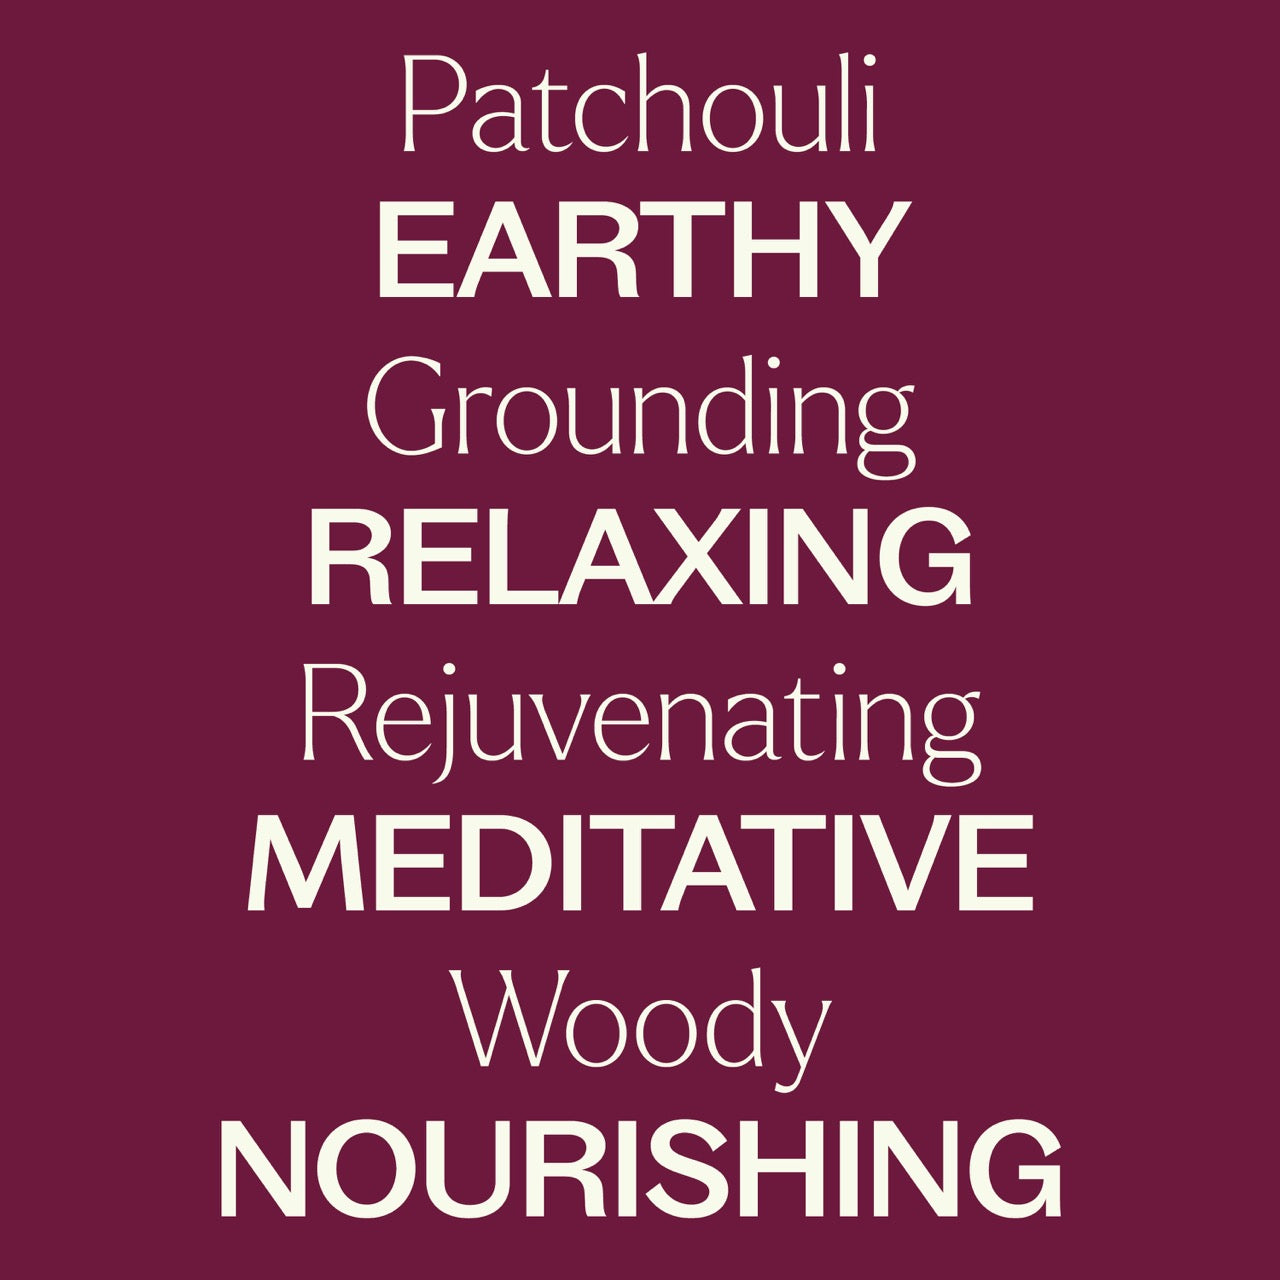 Patchouli Essential Oil Key Features: earthy, grounding, relaxing, rejuvenating, meditative, woodsy, nourishing